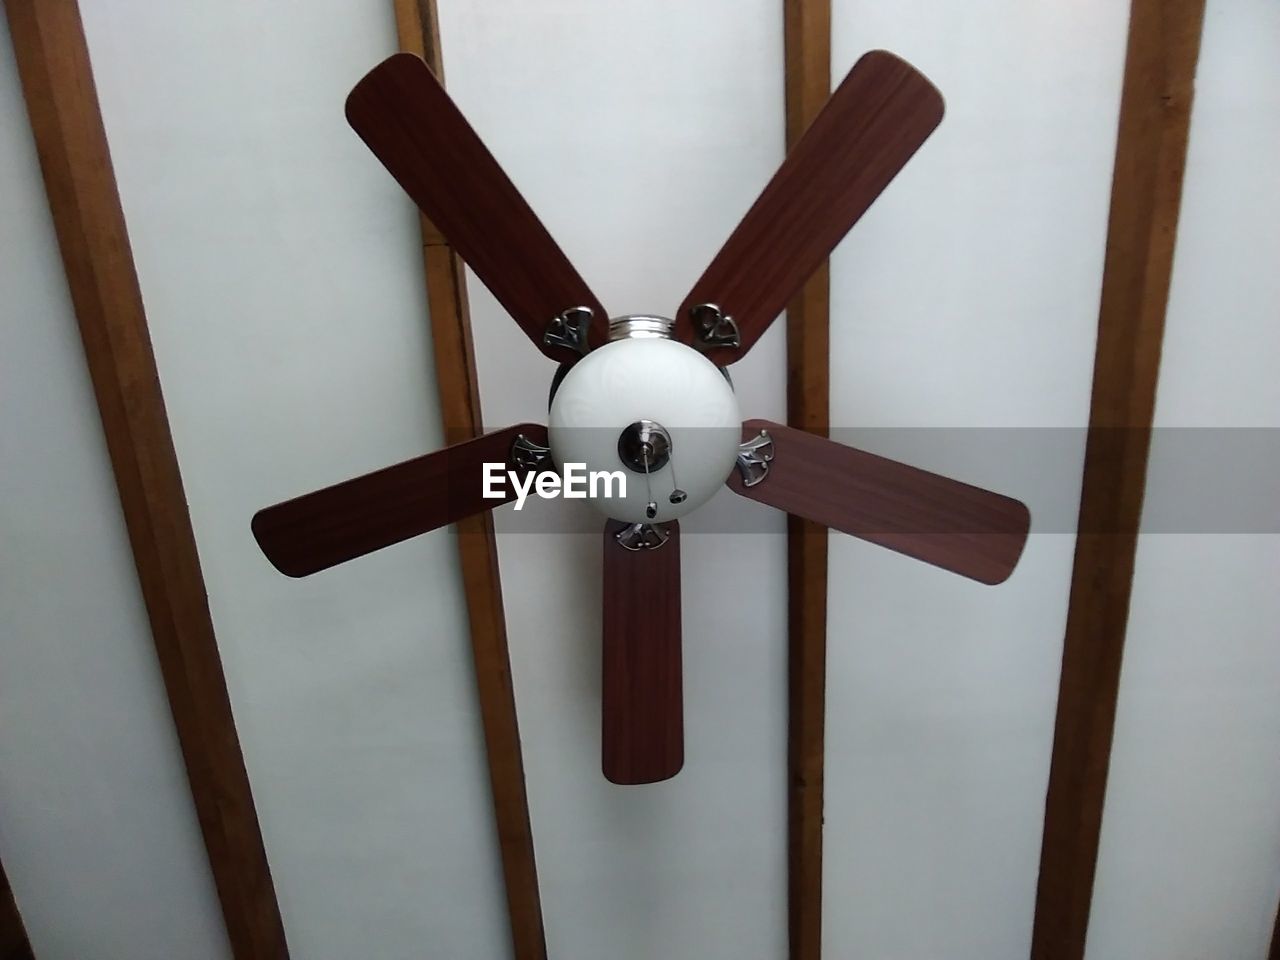 Low angle view of ceiling fan